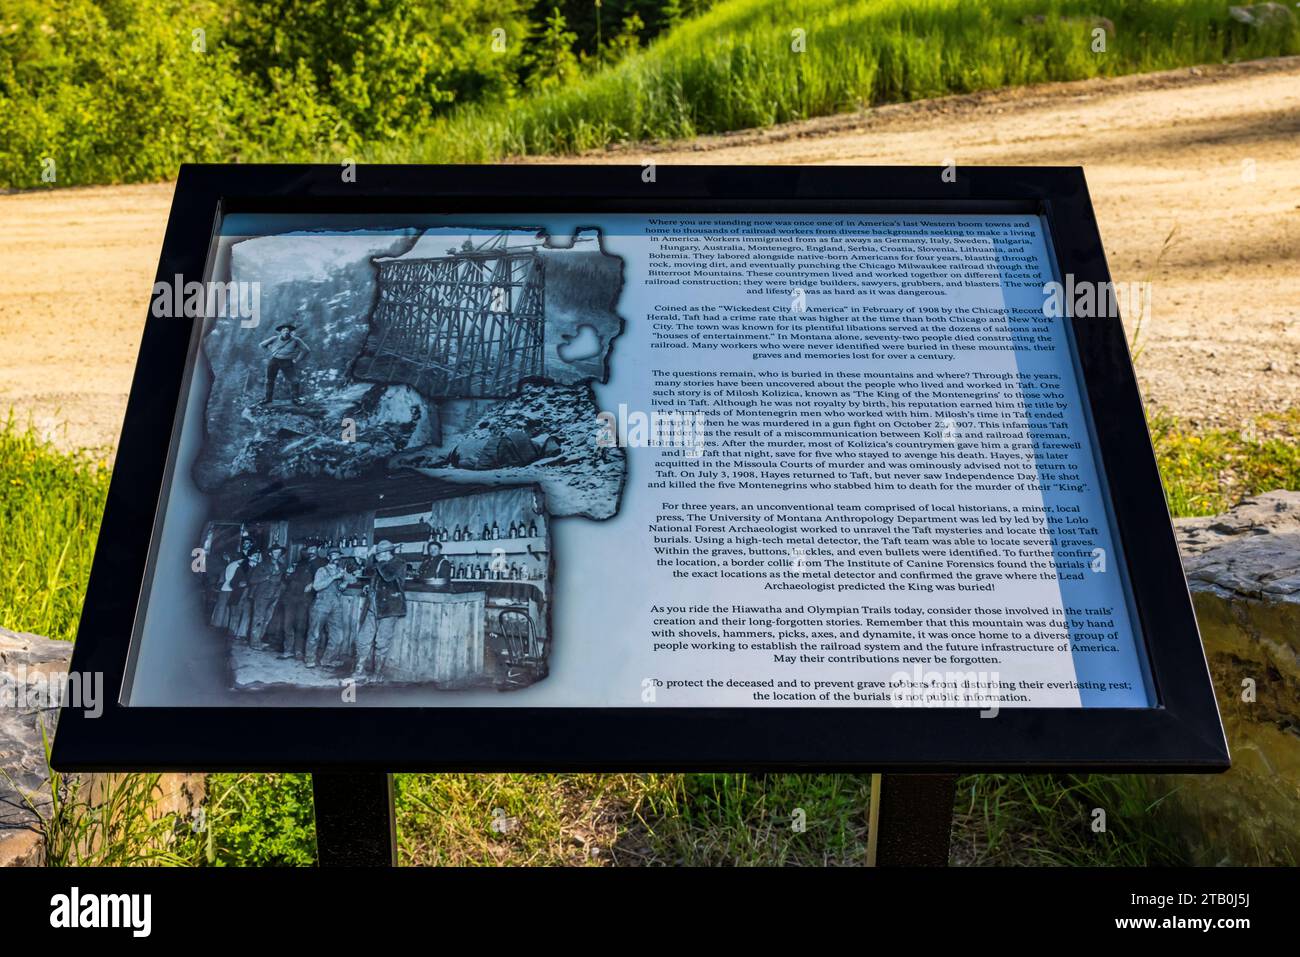 Interpretive sign about Taft, a railroad boom town, now ghost town, along the Hiawatha Scenic Bike Trail, Montana and Idaho, USA [No release; editoria Stock Photo